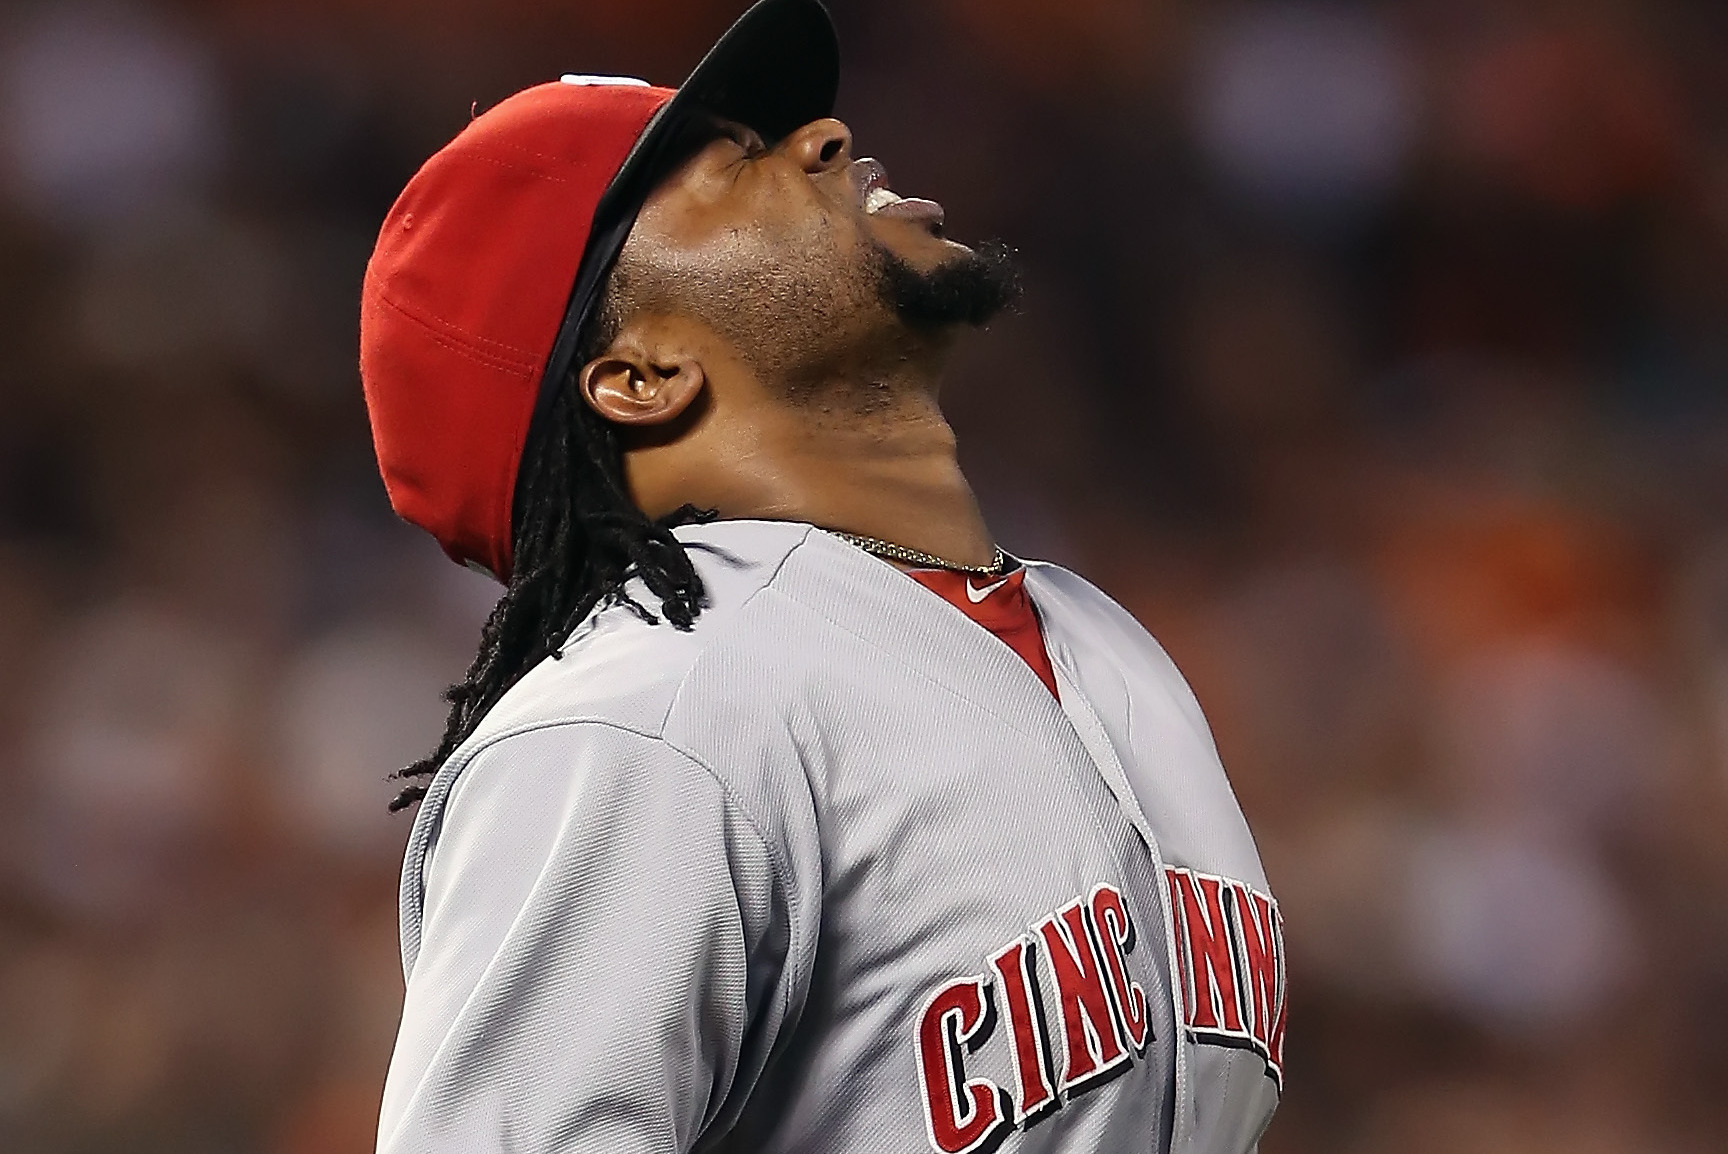 Reds Lose Johnny Cueto but Win Opener Against Giants - The New